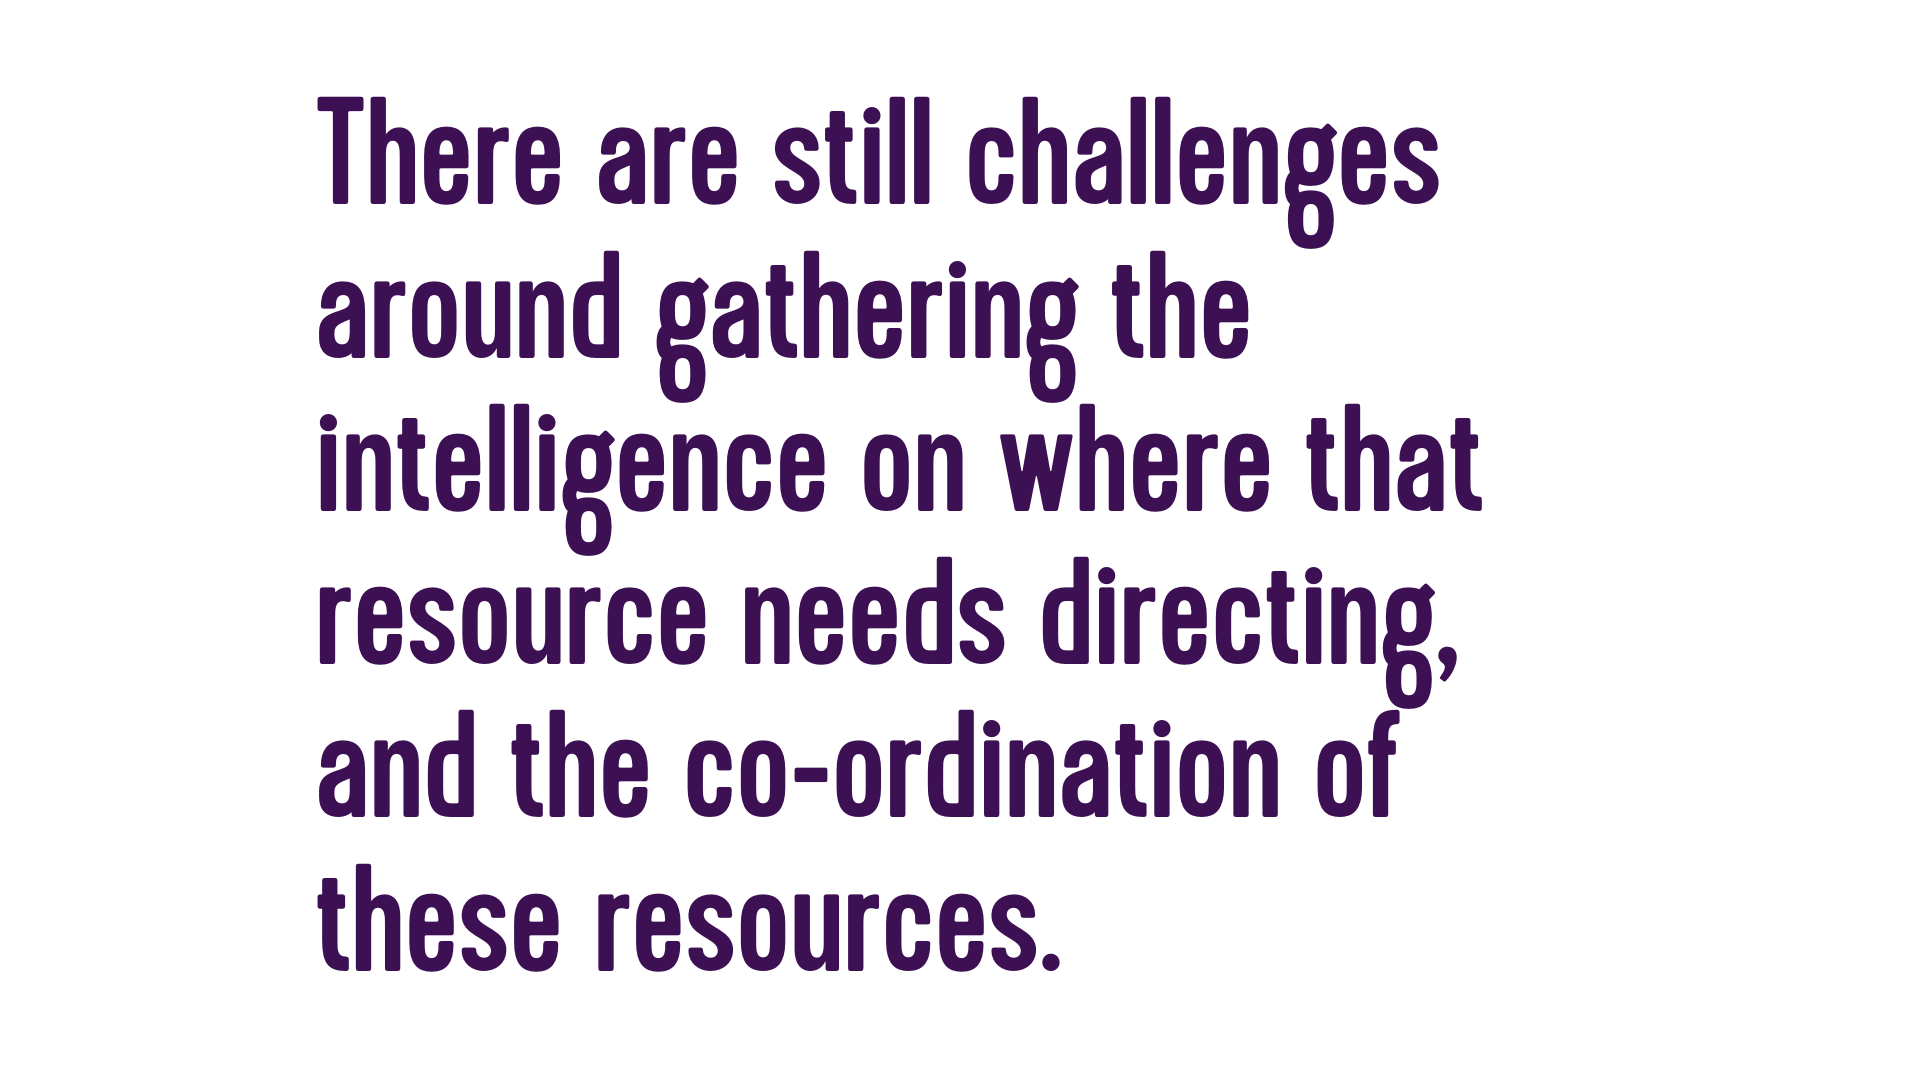 There are still challenges around gathering the intelligence on where that resource needs directing, and the co-ordination of these resources. 